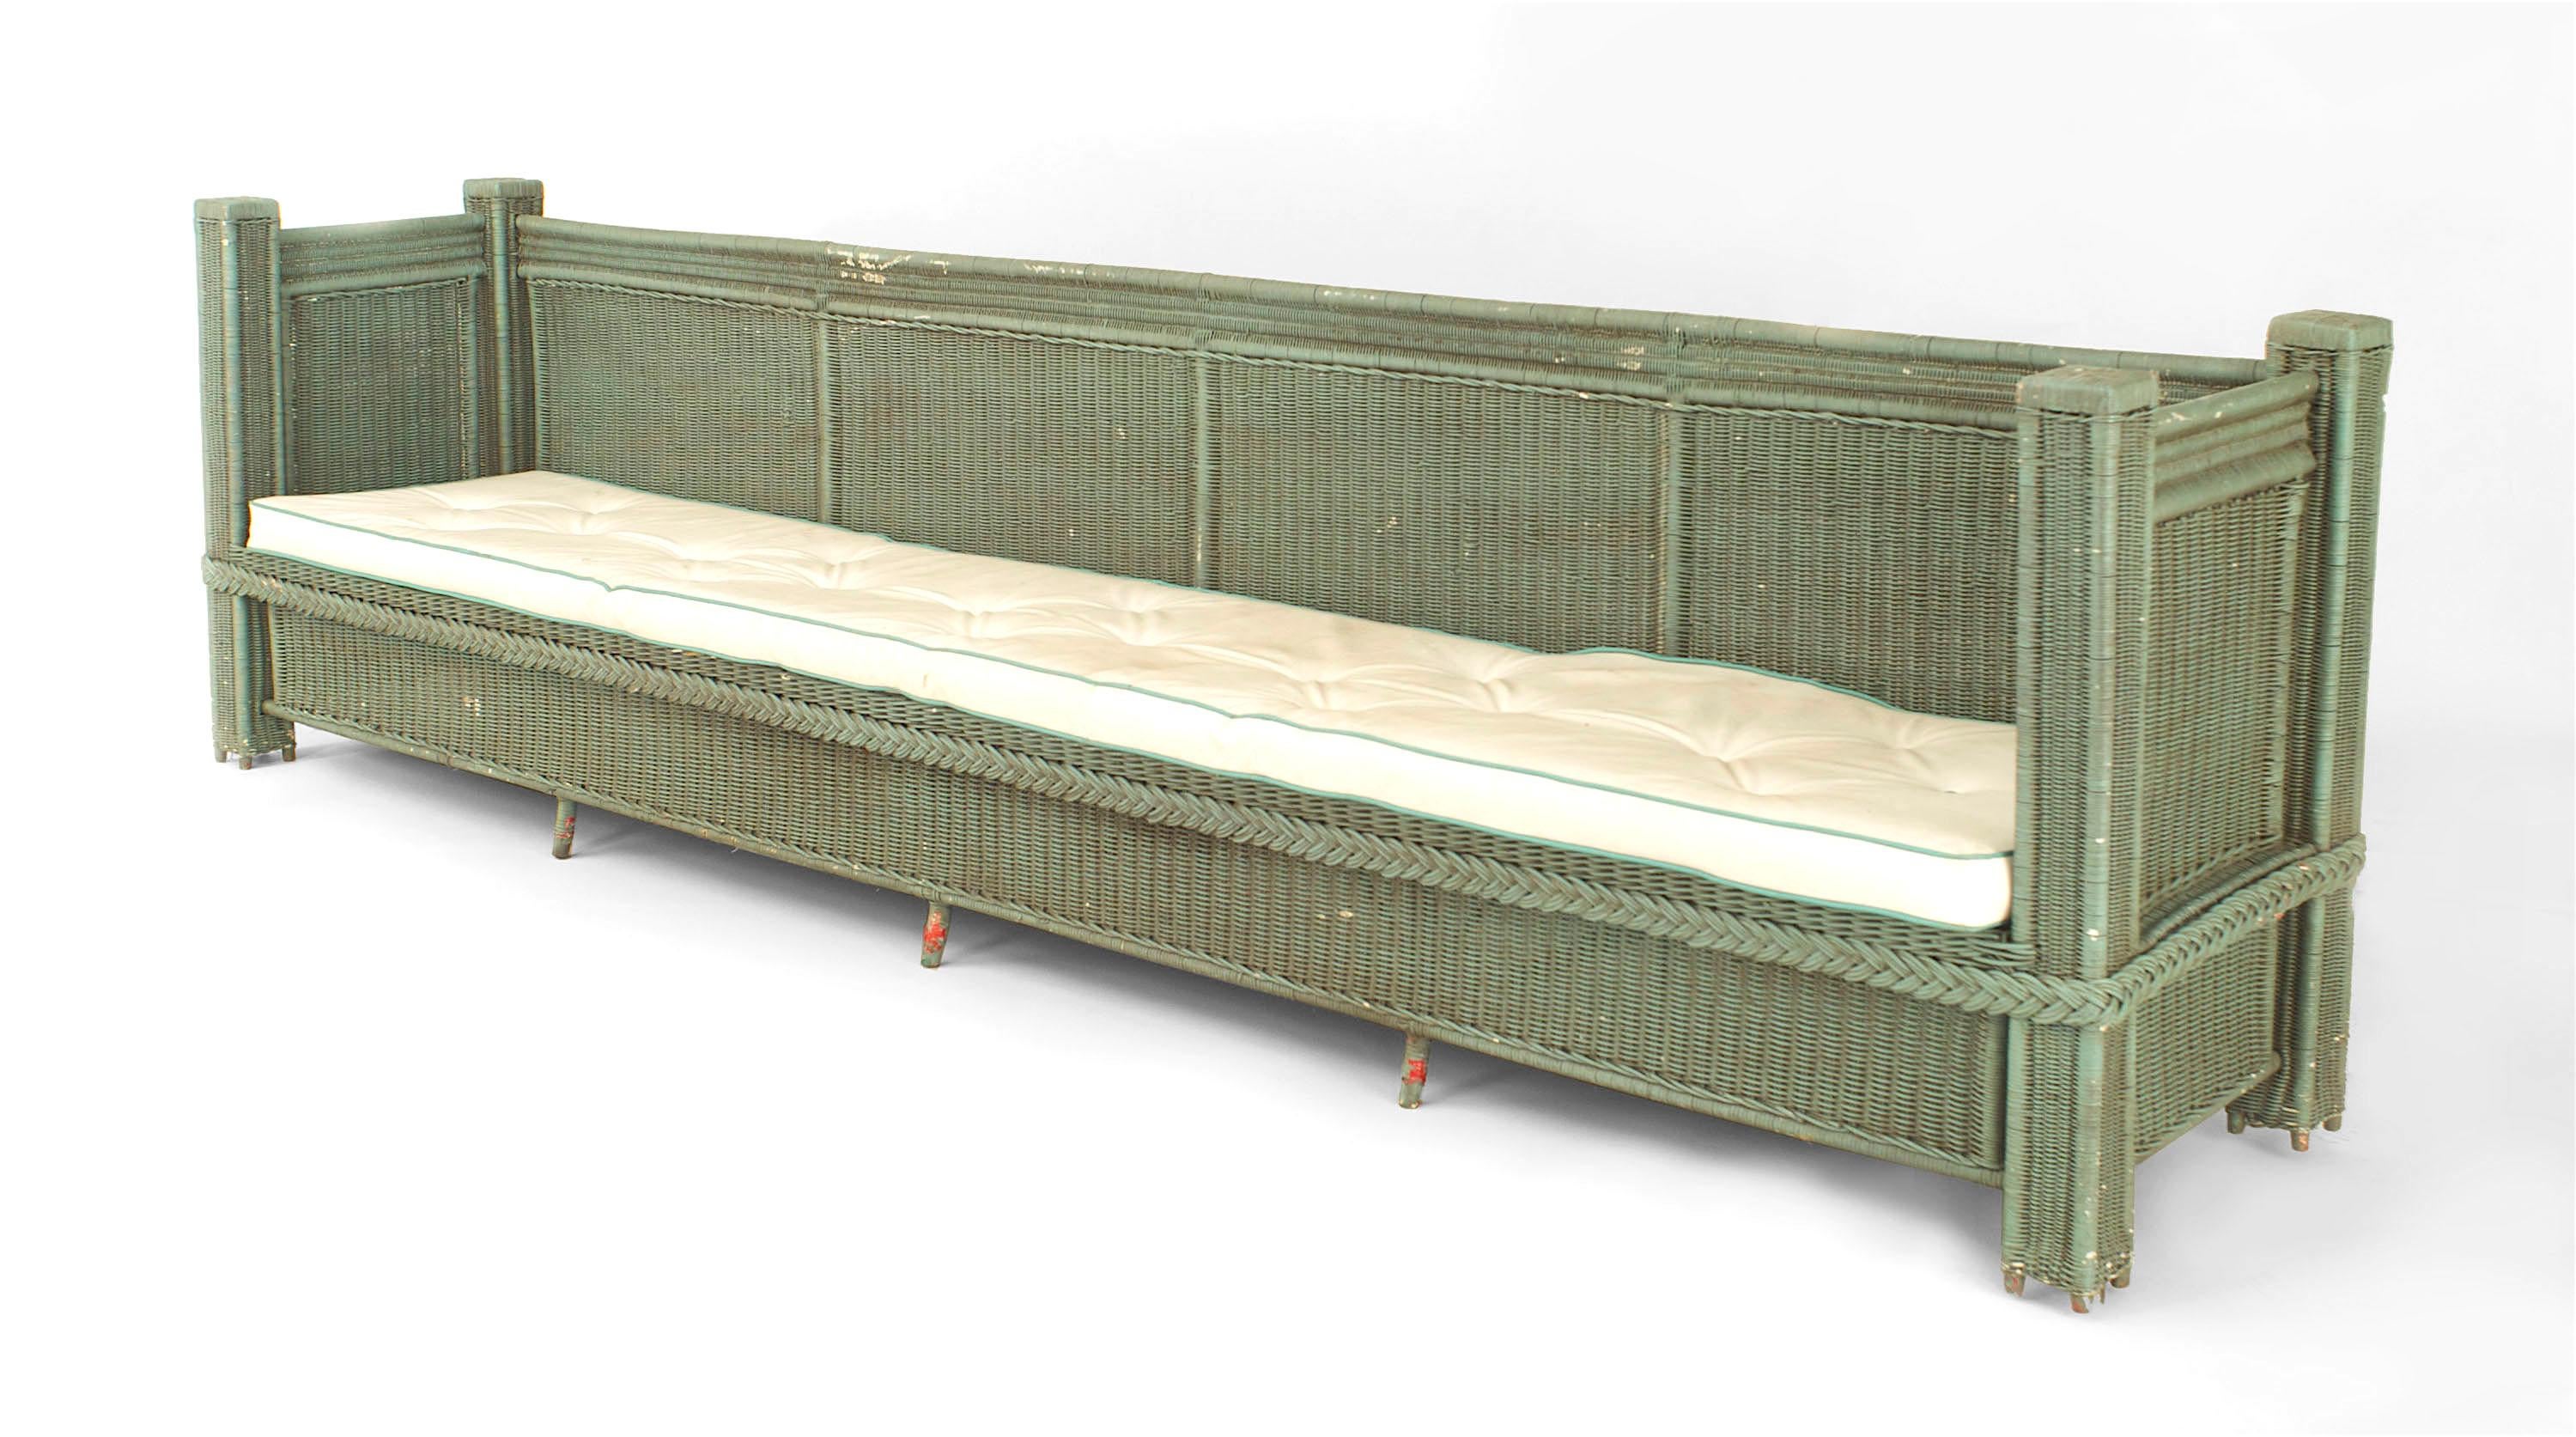 American green painted extend settee with a square woven panel back, sides, and apron with a single cushion.